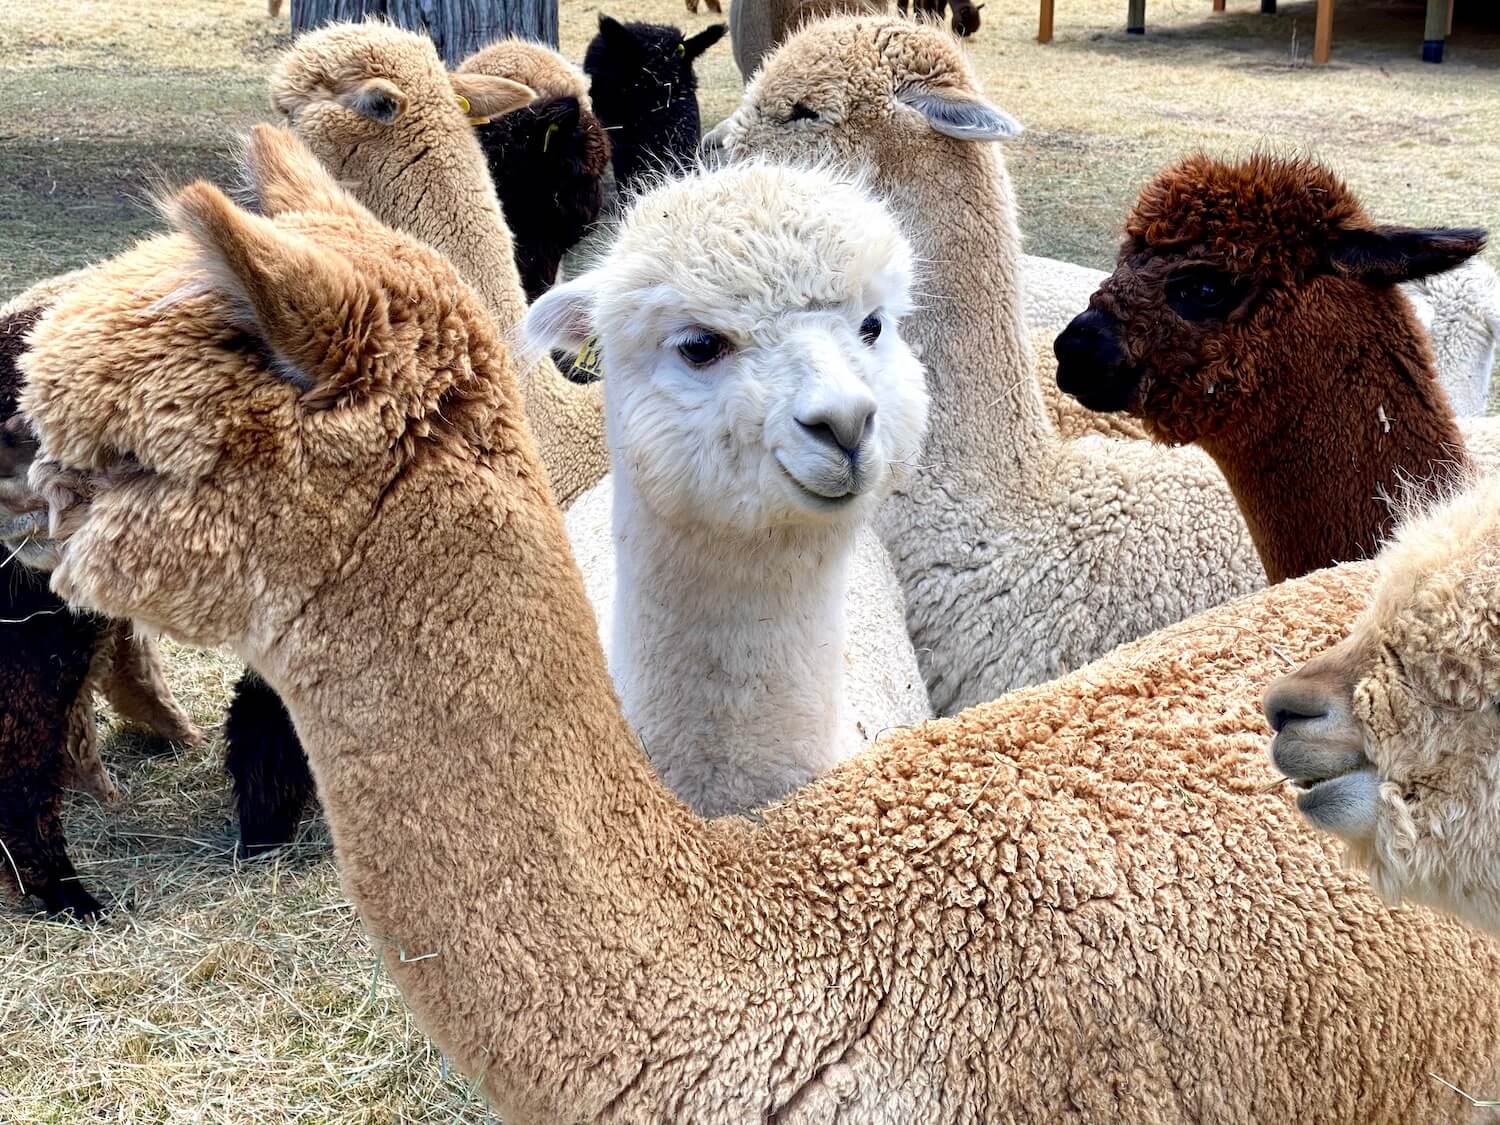 A white alpaca looks forward around other animals of brown and dark brown colors. Visiting an alpaca farm is a fun thing to do in Bend Oregon while visiting Central Oregon.